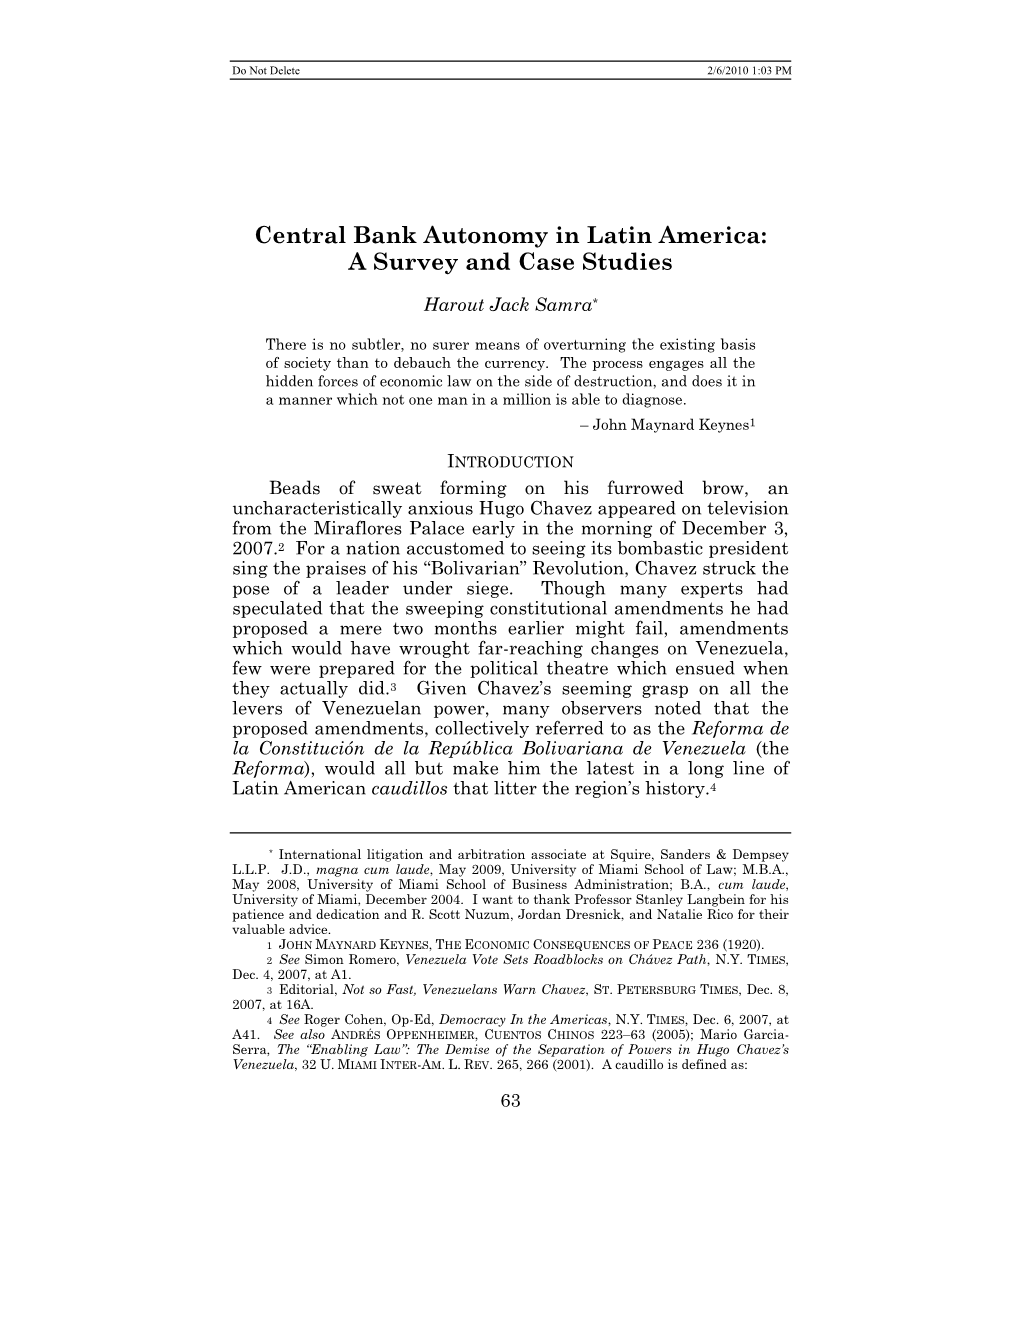 Central Bank Autonomy in Latin America: a Survey and Case Studies